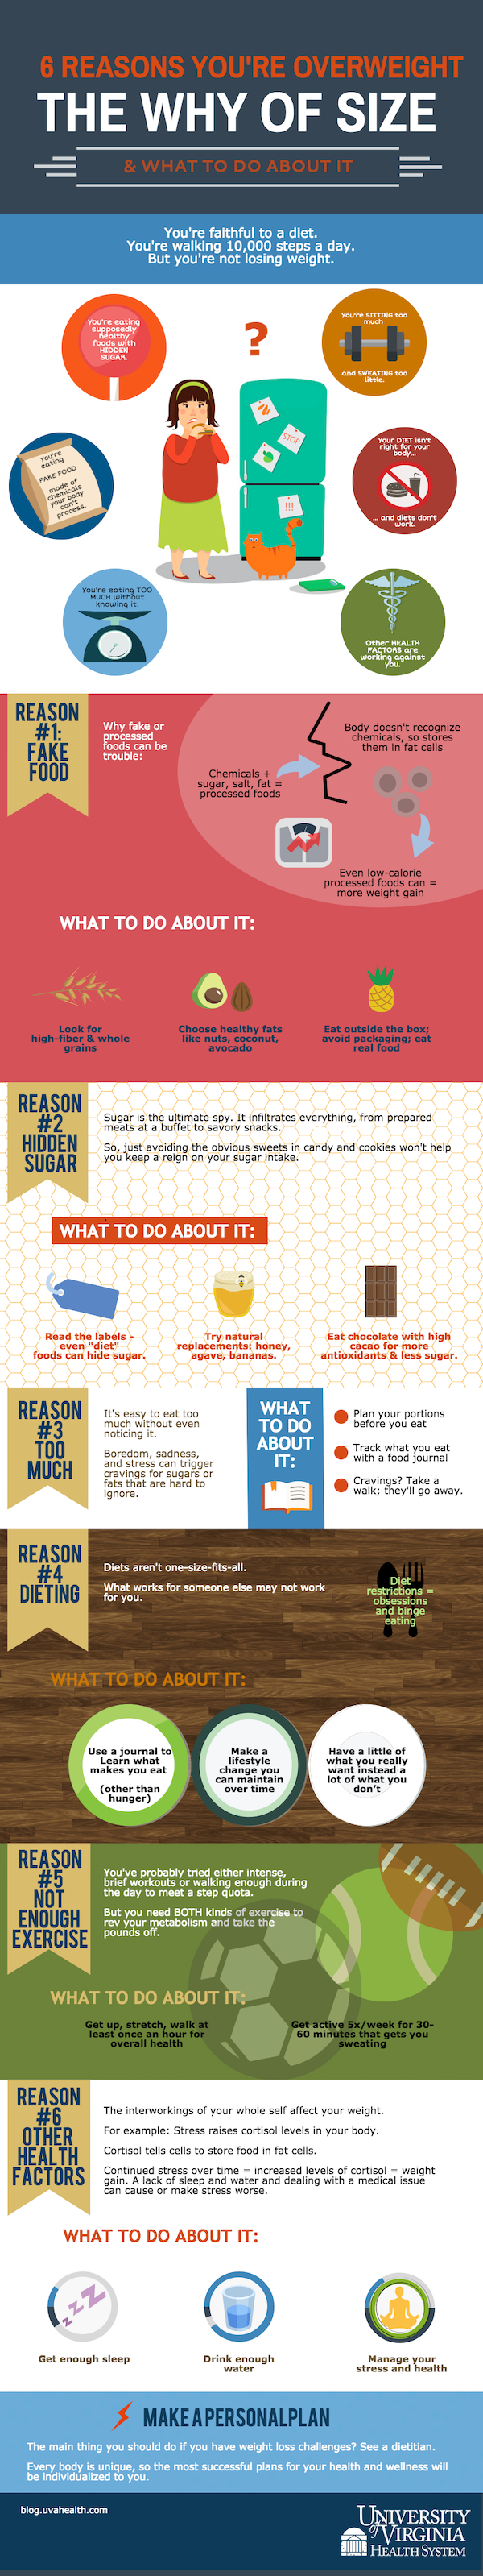 infographic 6 reasons you're overweight